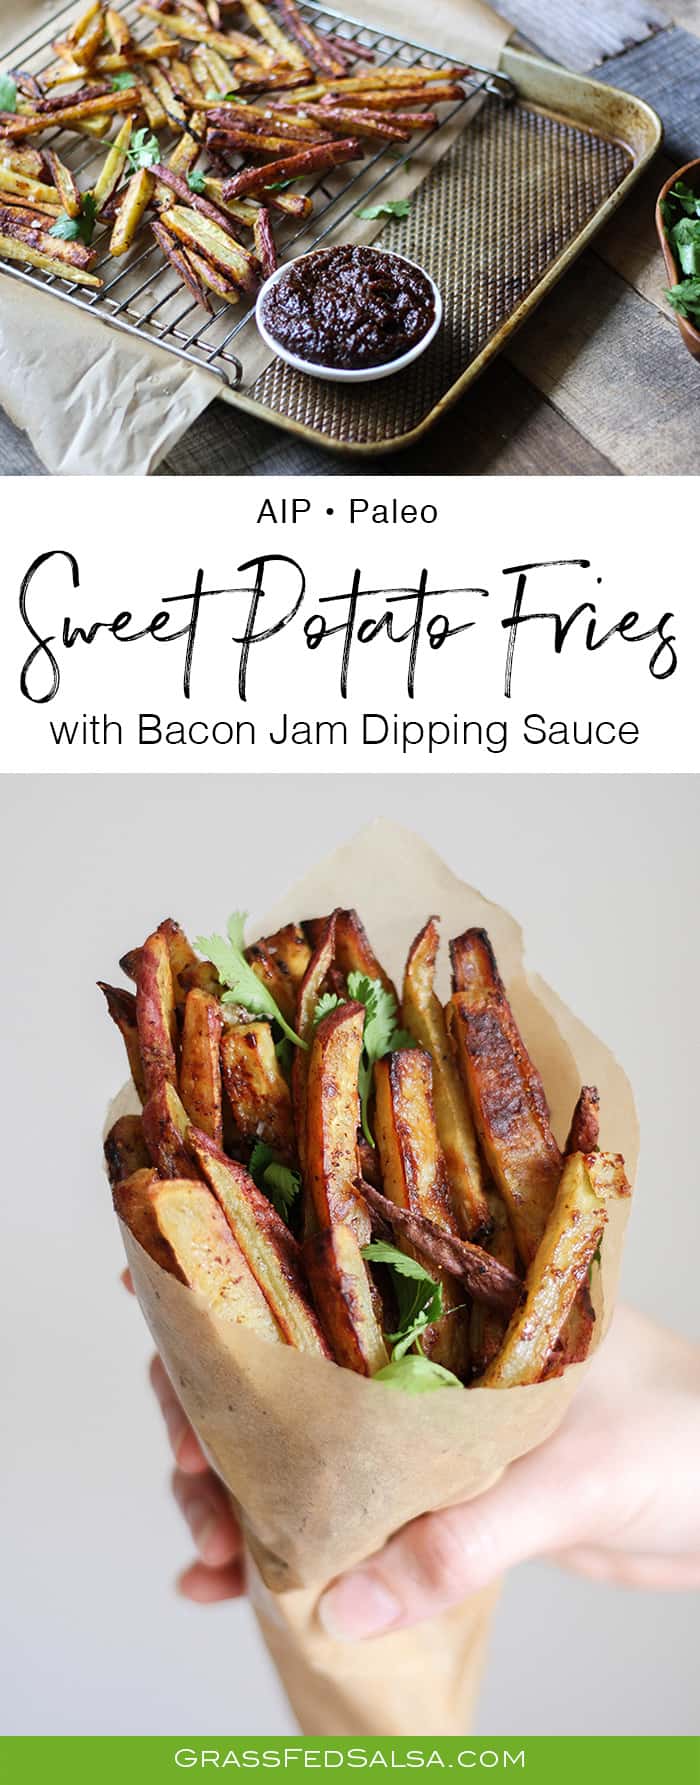 AIP Sweet Potato Fries with Bacon Jam Dipping Sauce